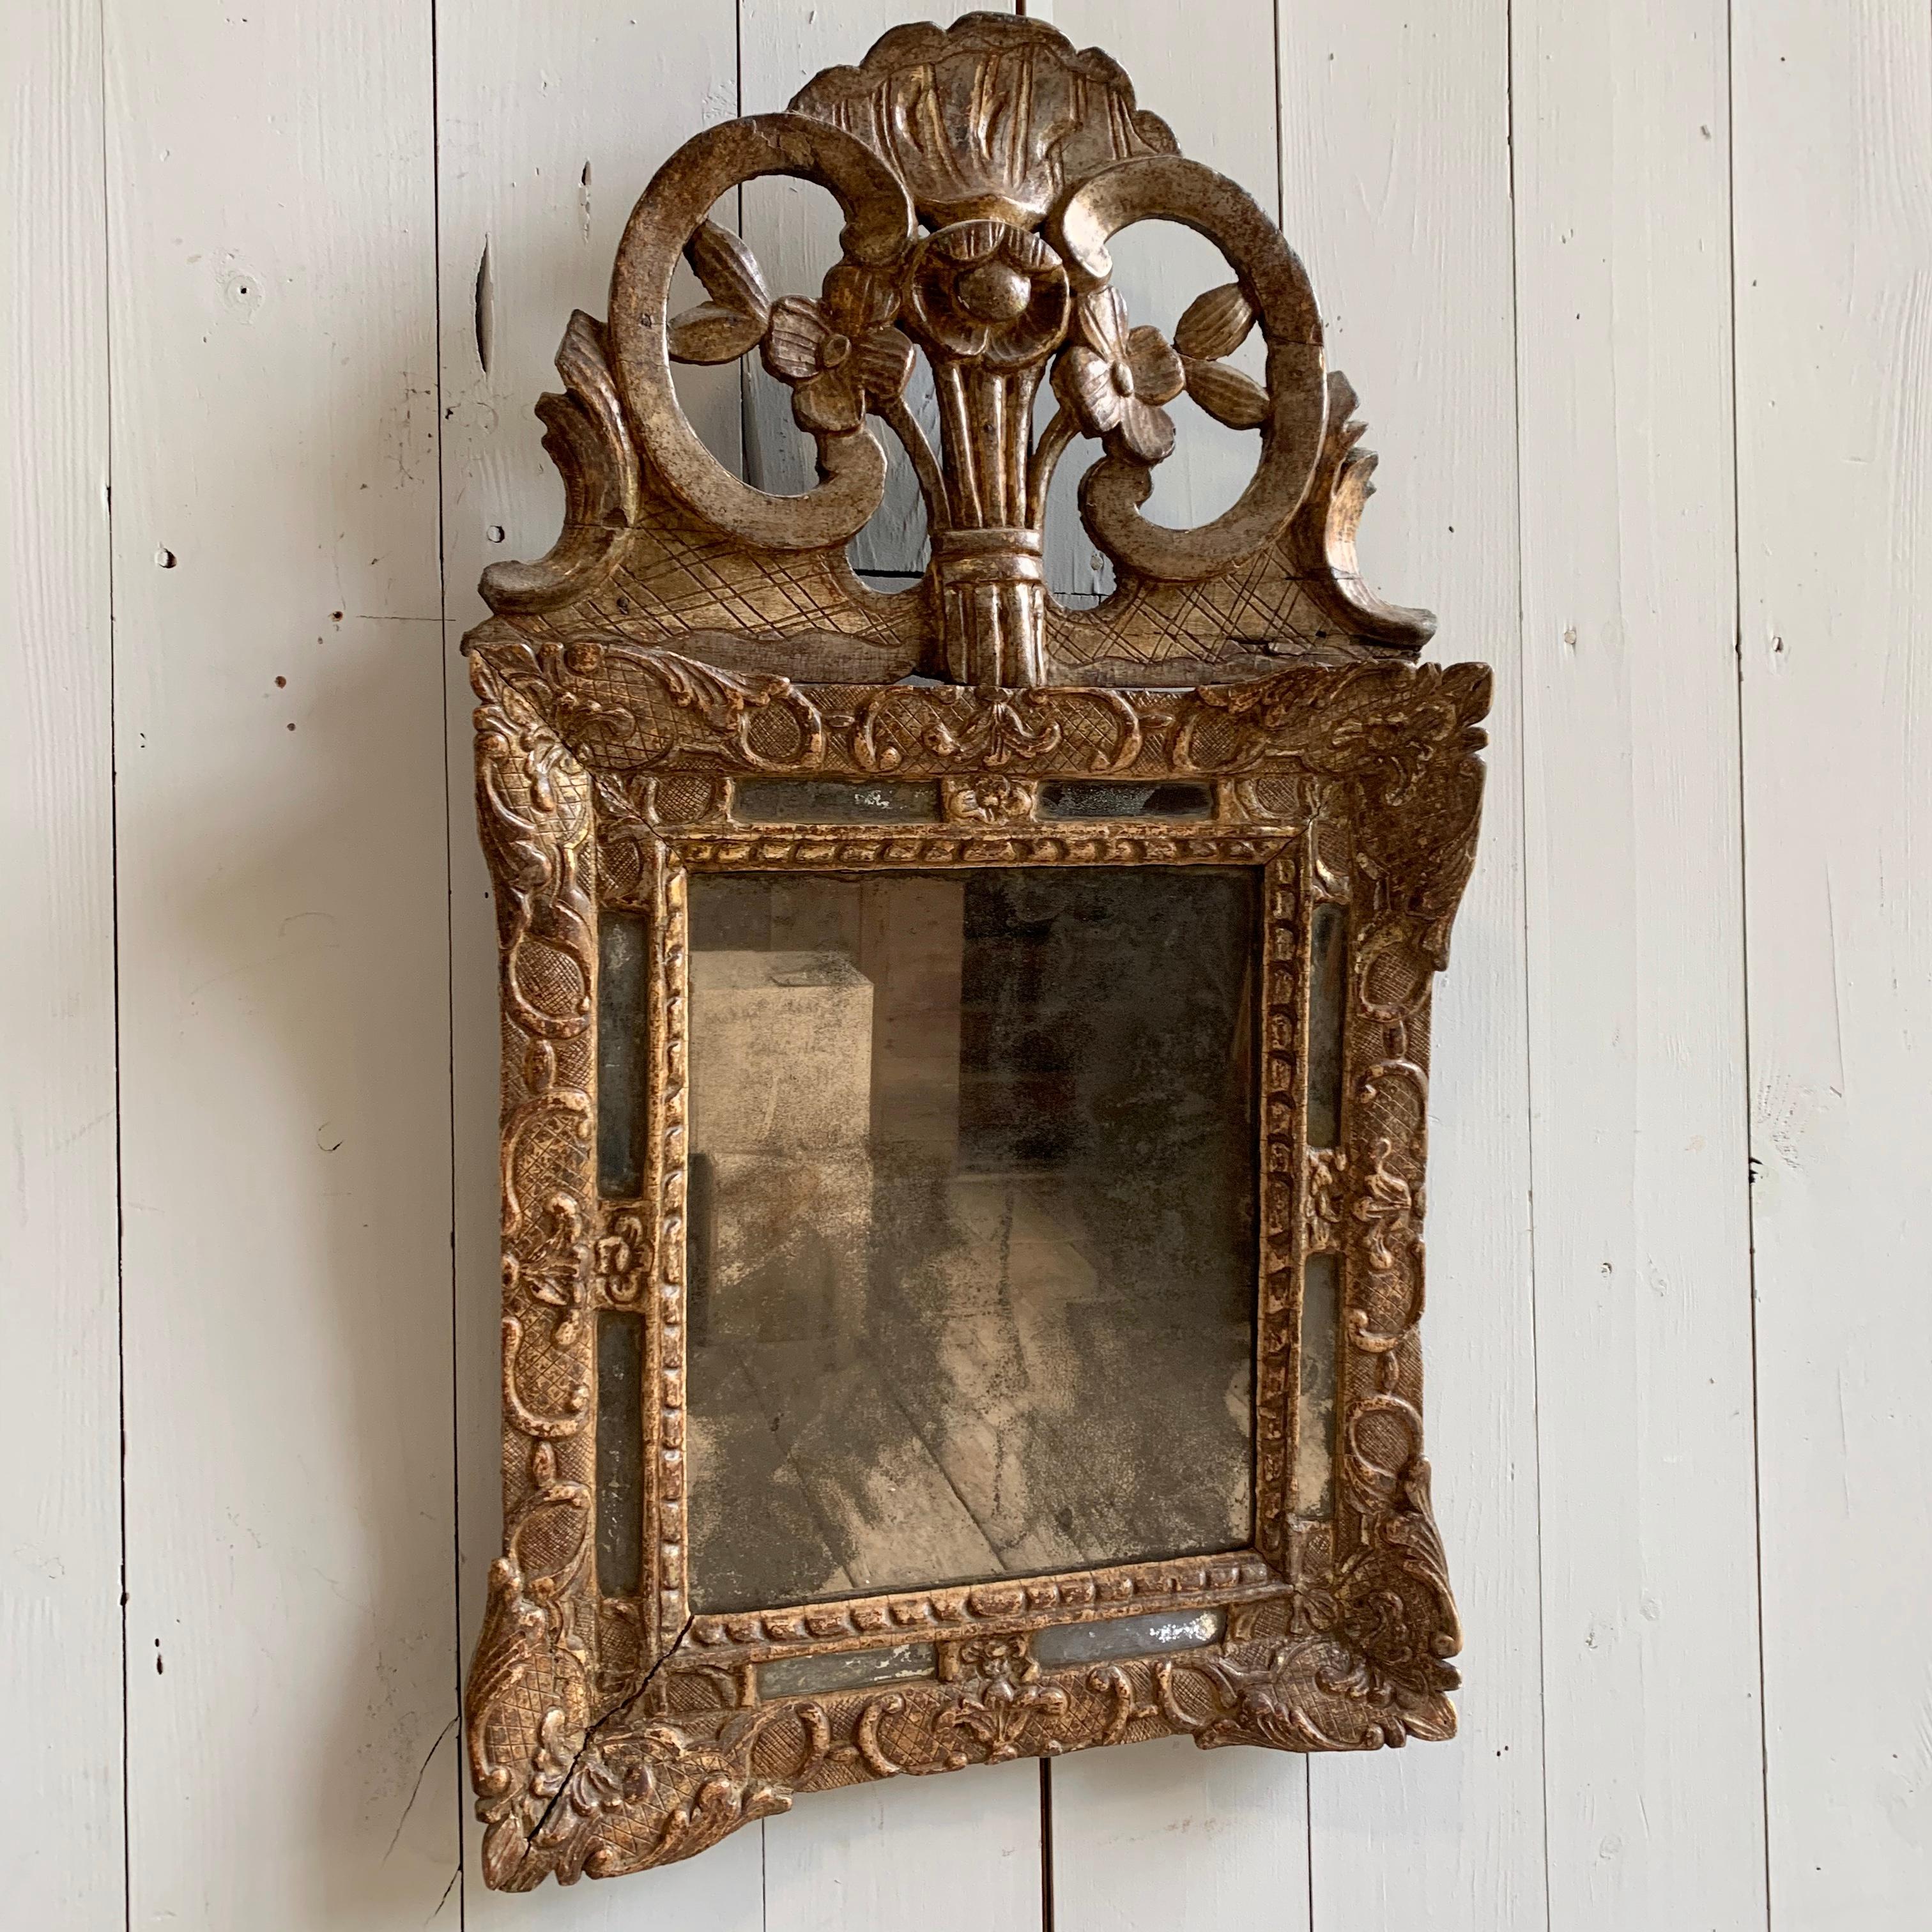 A petite Louis XV period mirror with carved and embossed decoration with an upper crest over a rectangular glass plate, circa 1760, France.